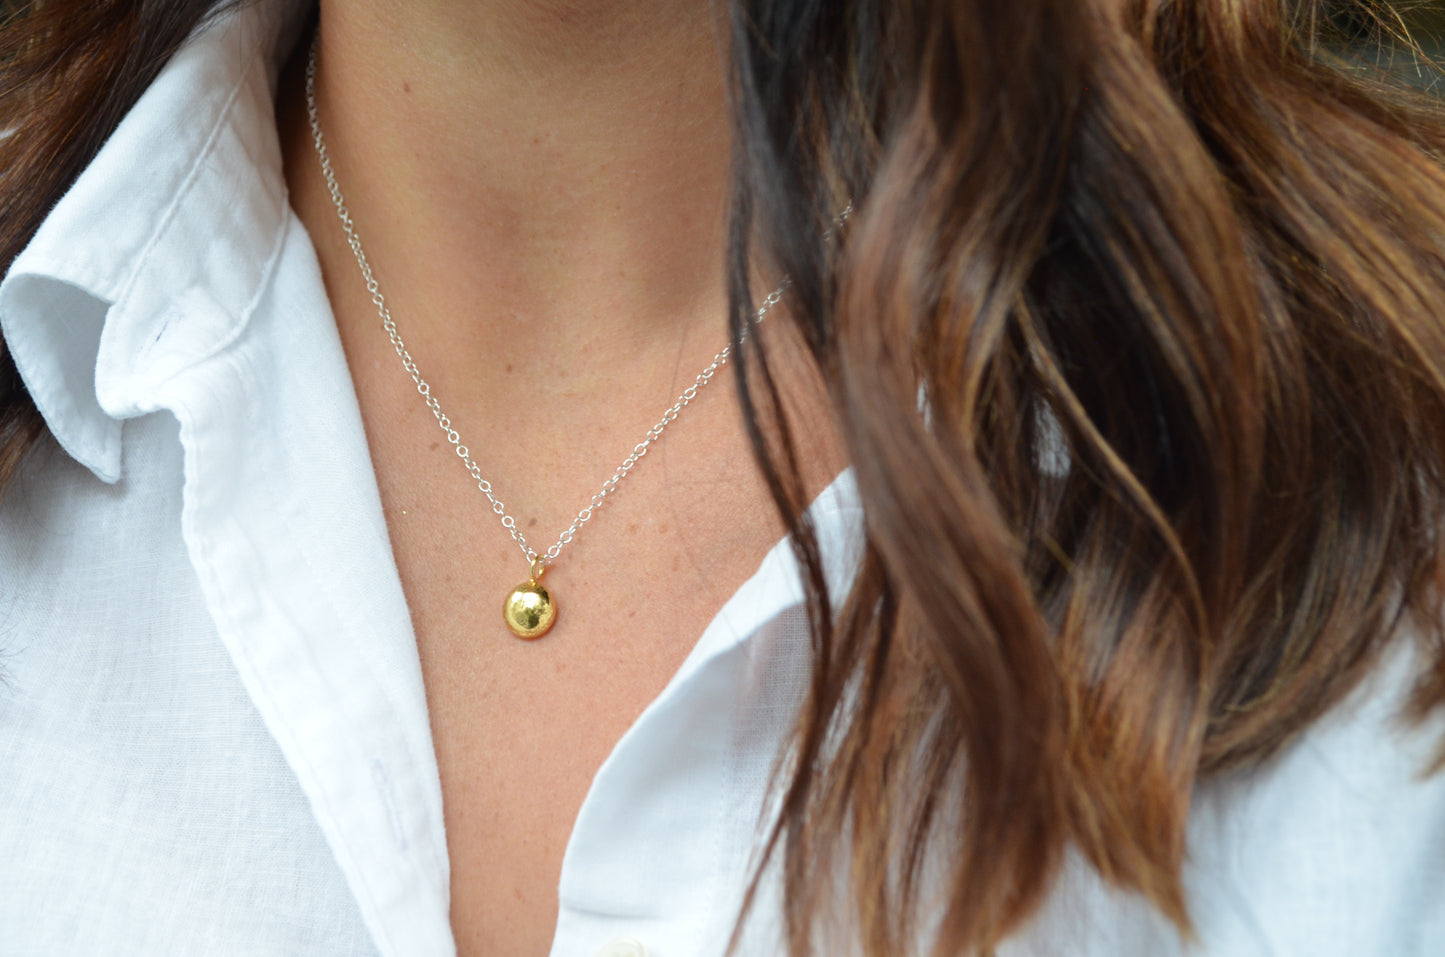 The Penny Charm necklace- sterling silver and 22ct gold vermeil charms on a trace chain necklace